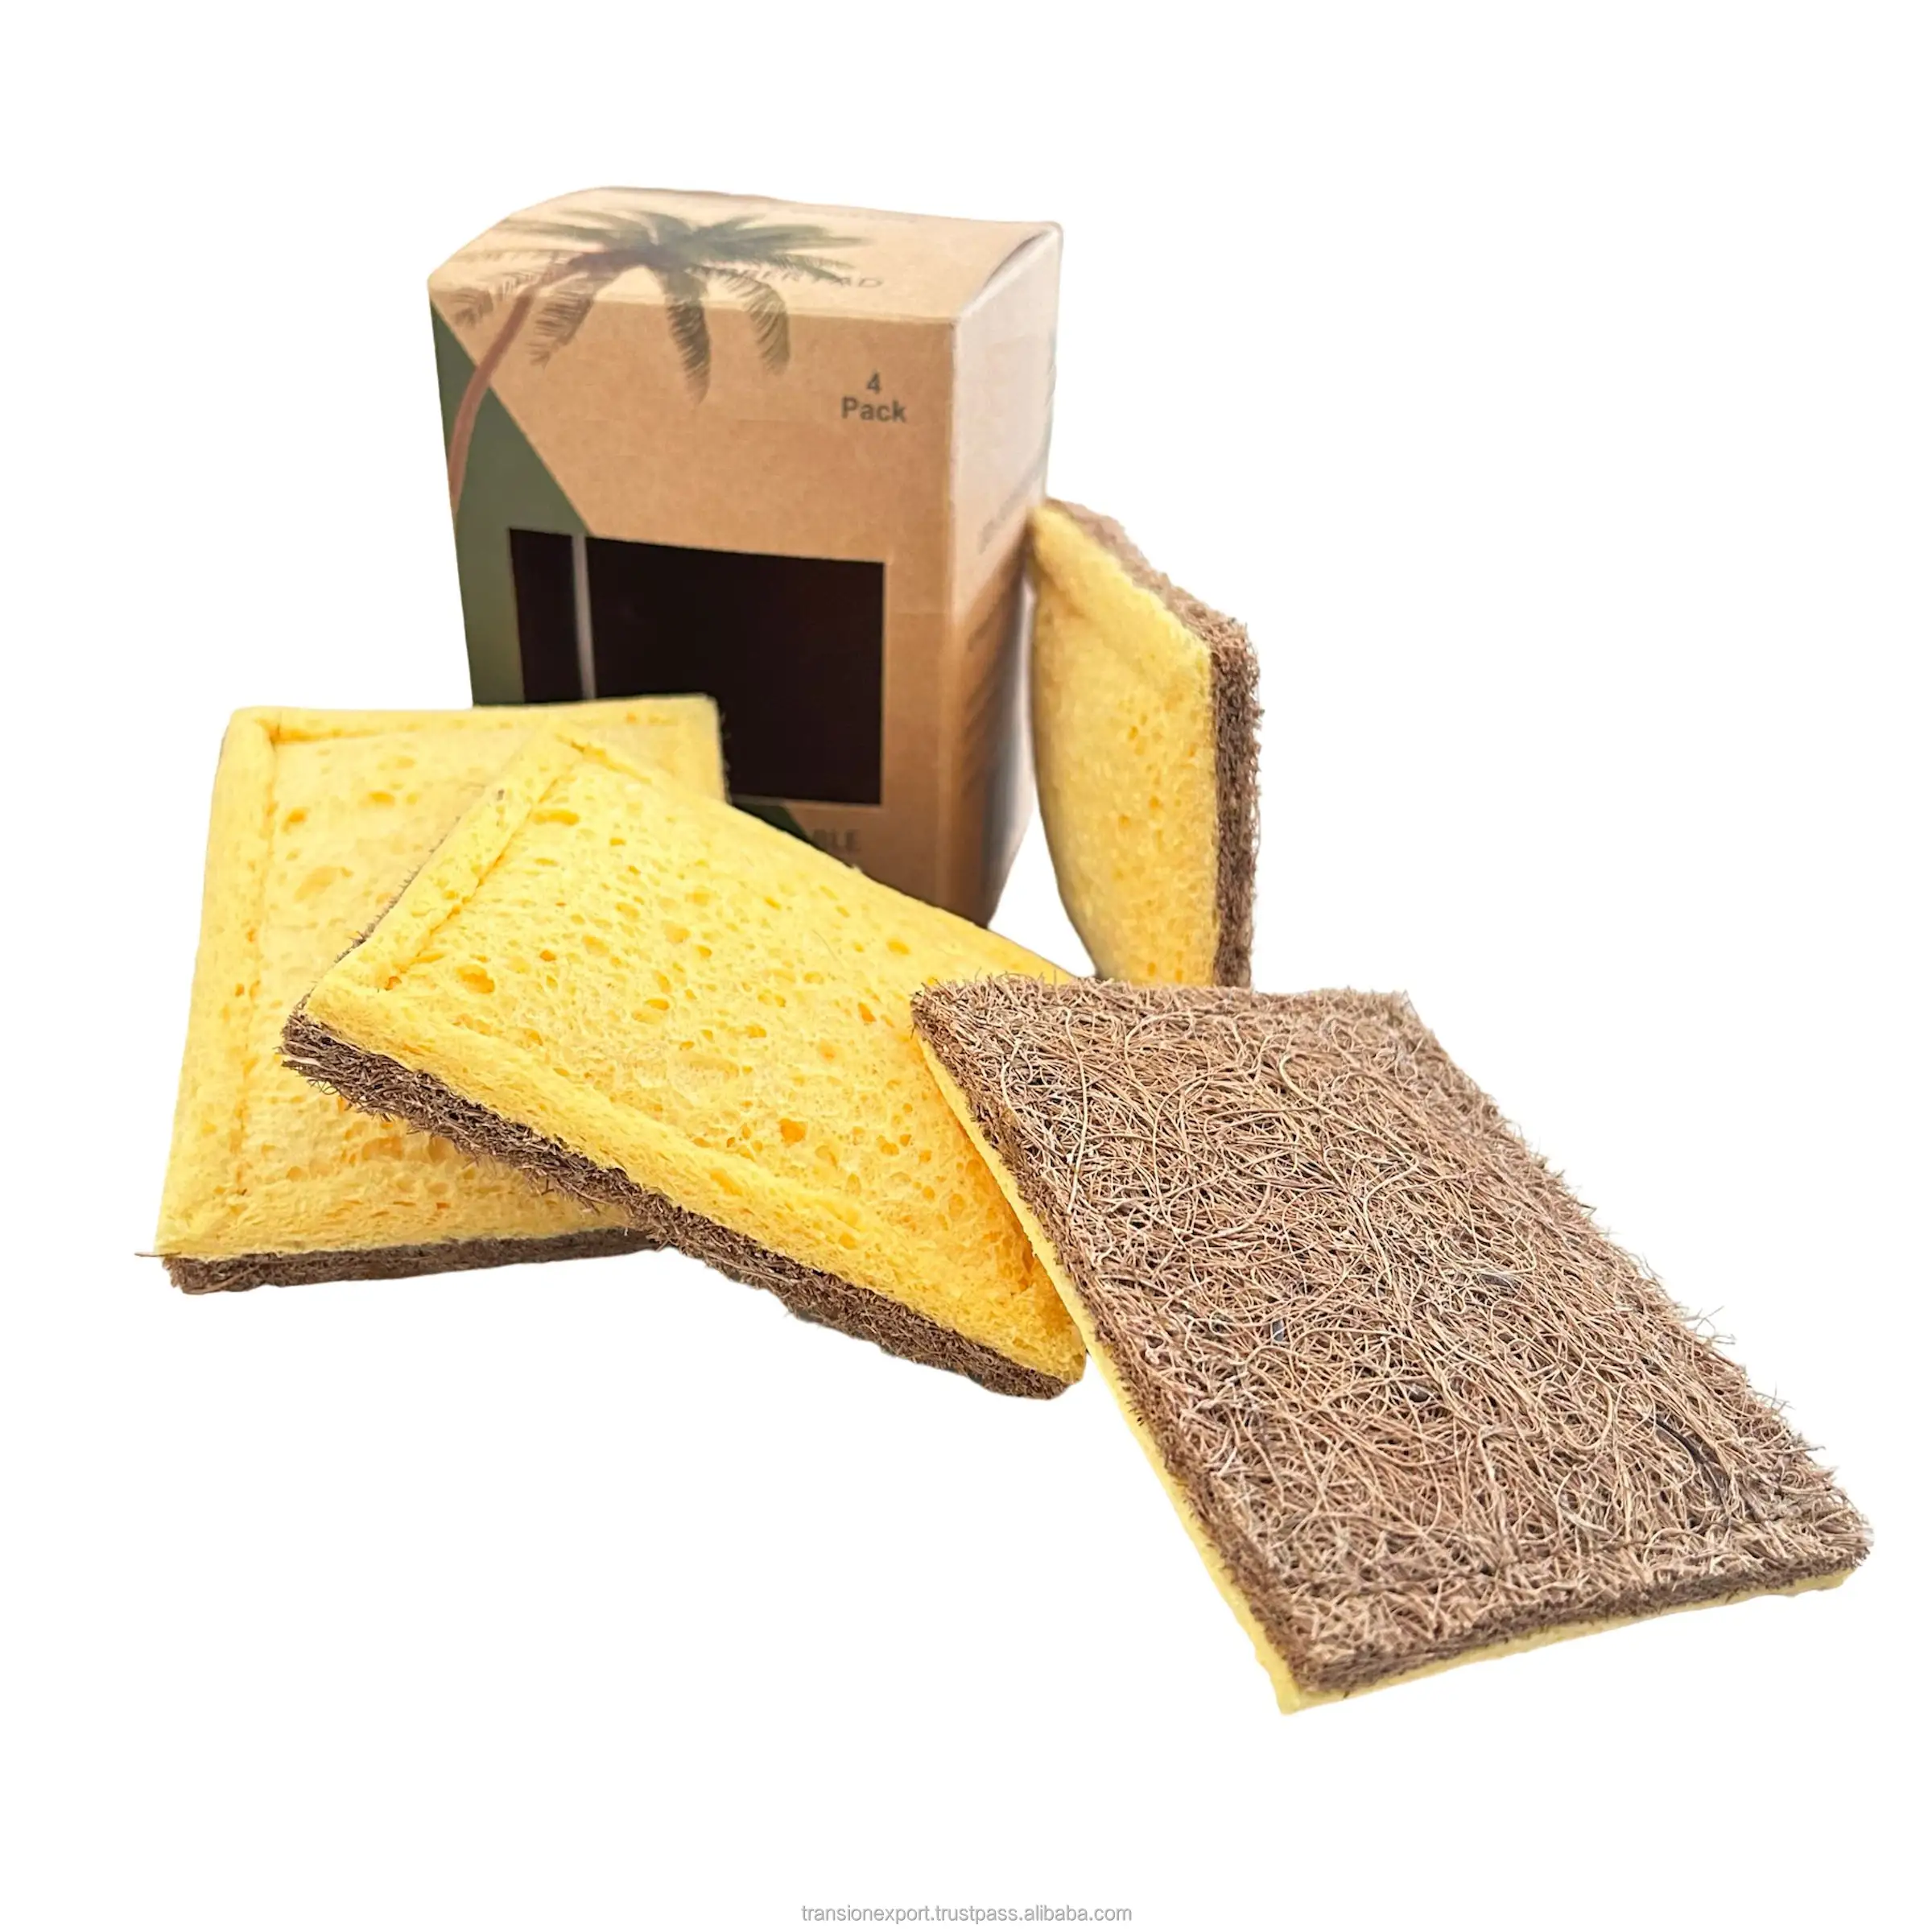 Biodegradable Eco Friendly Natural Dish Washing Dish Scourer Scouring Pads Luffa Cellulose Loofah Kitchen Dish Cleaning Sponge